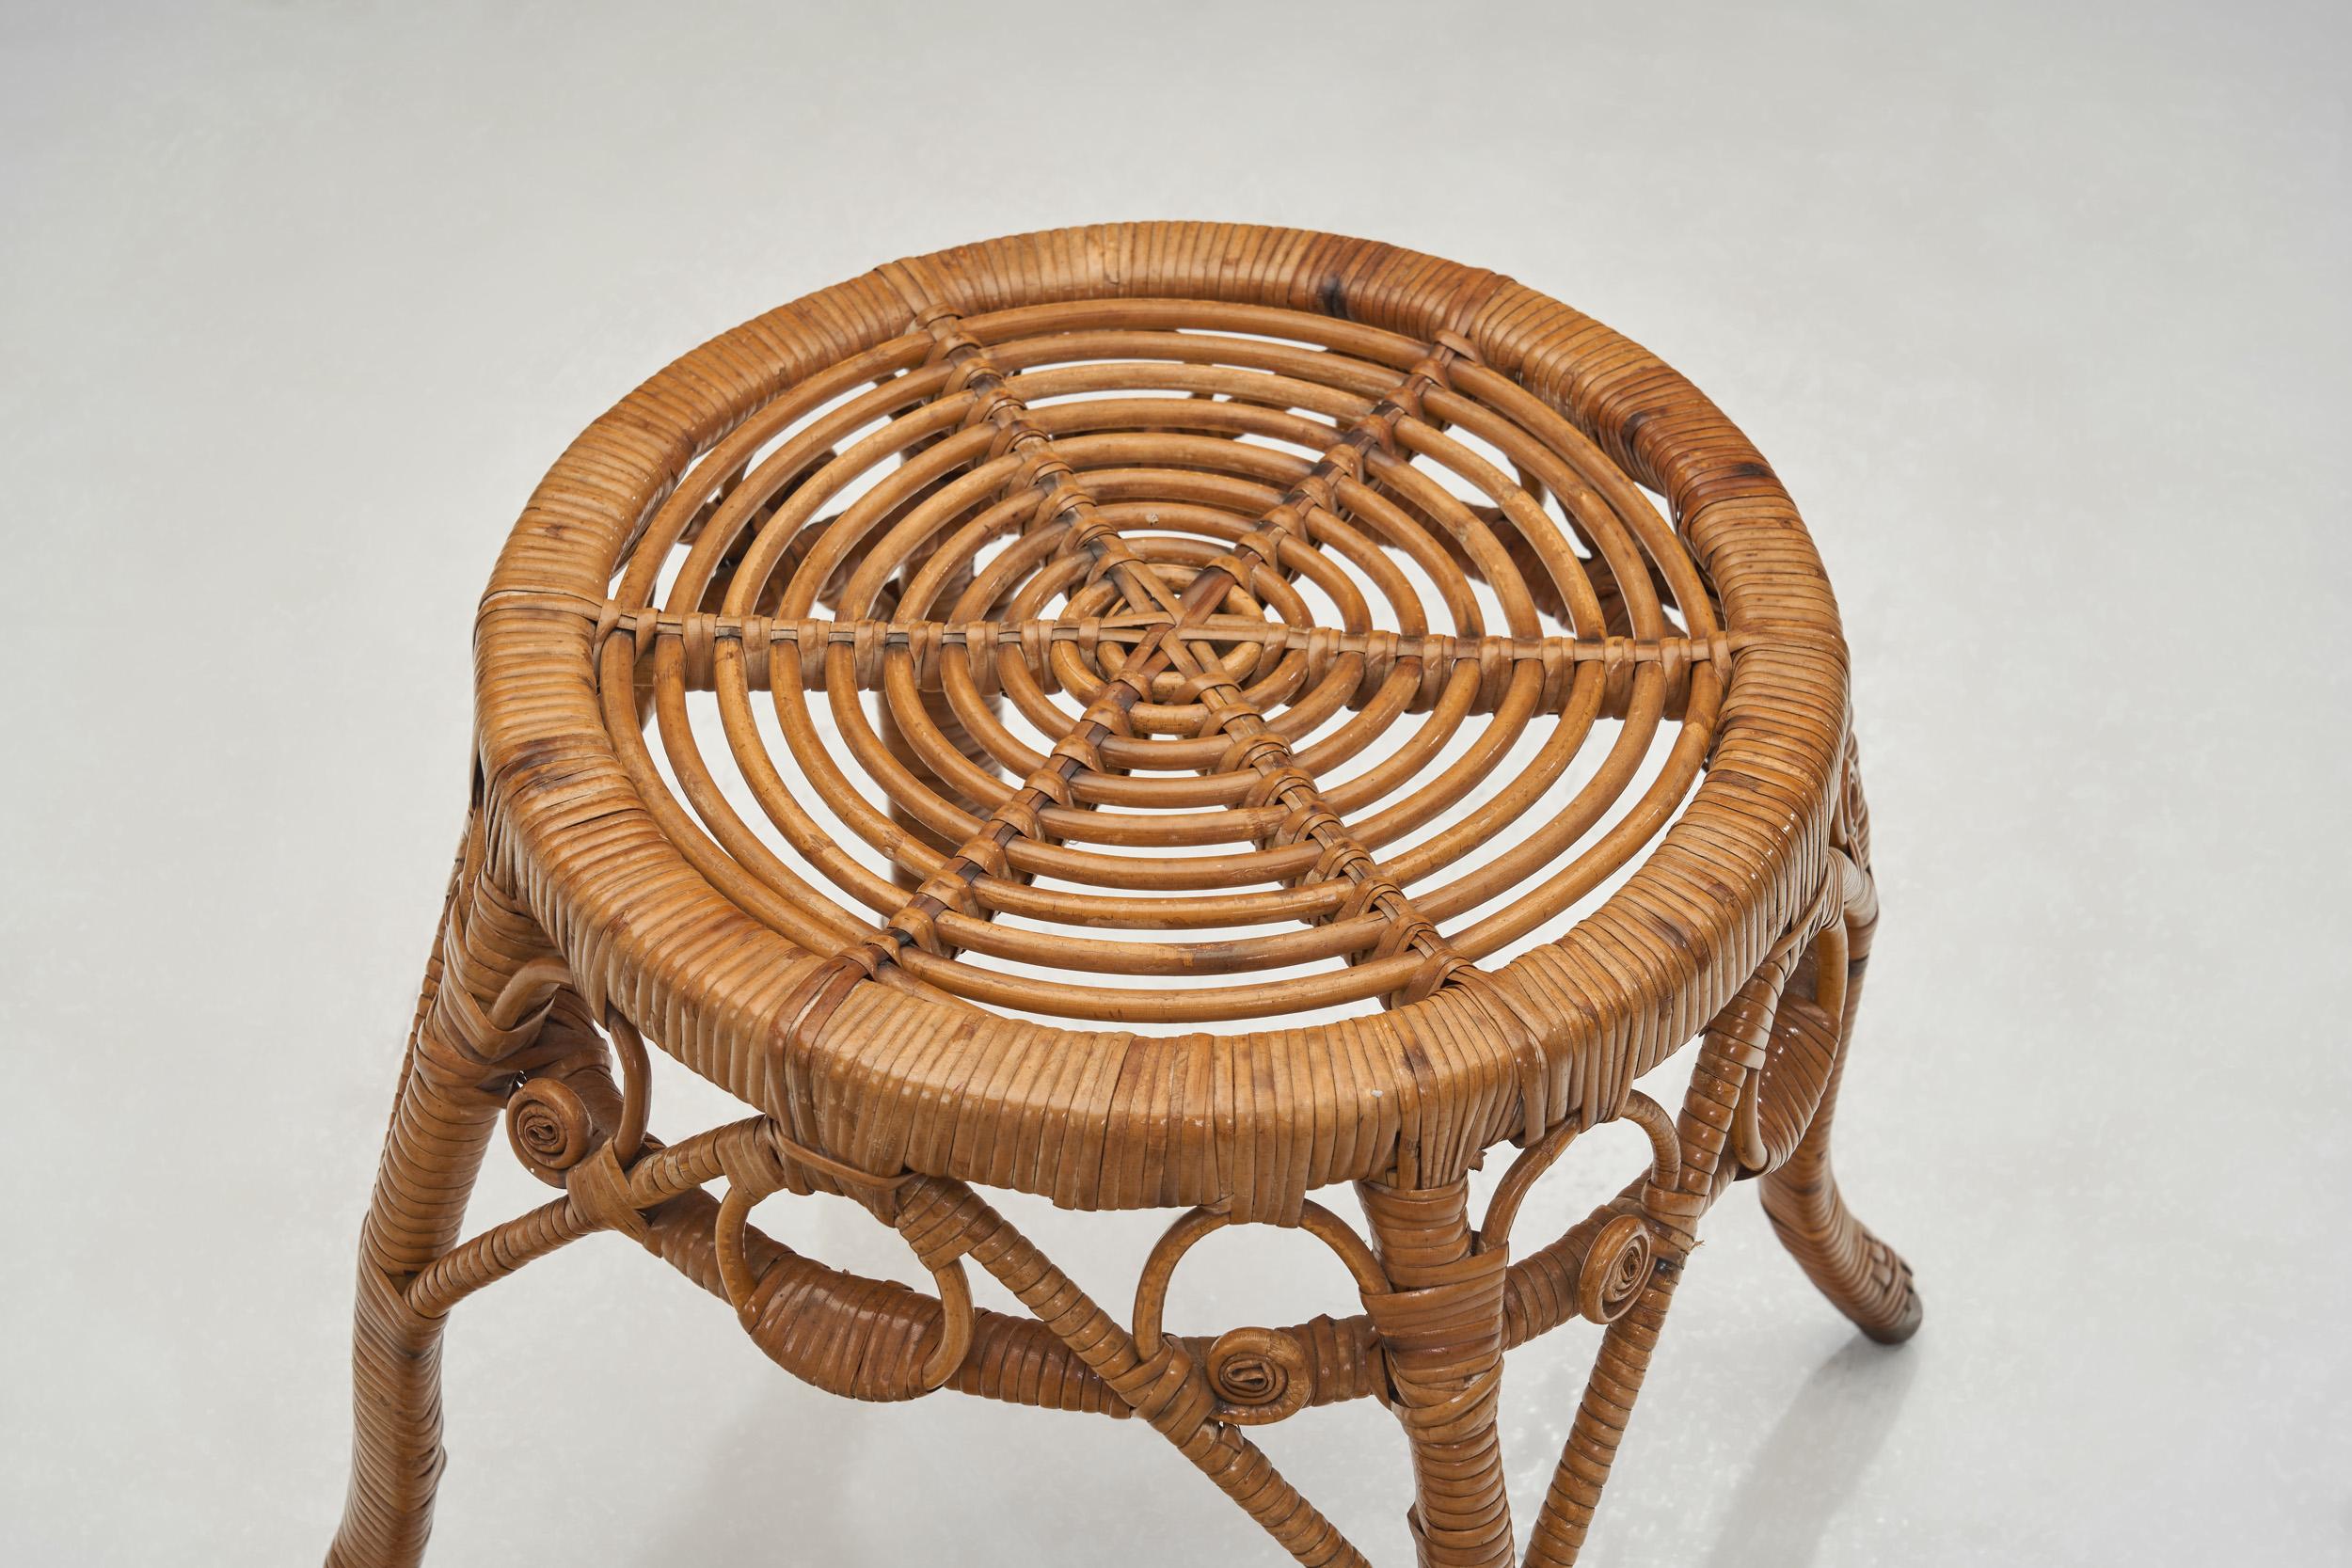 Woven Rattan Stool, Europe Early 20th Century For Sale 11